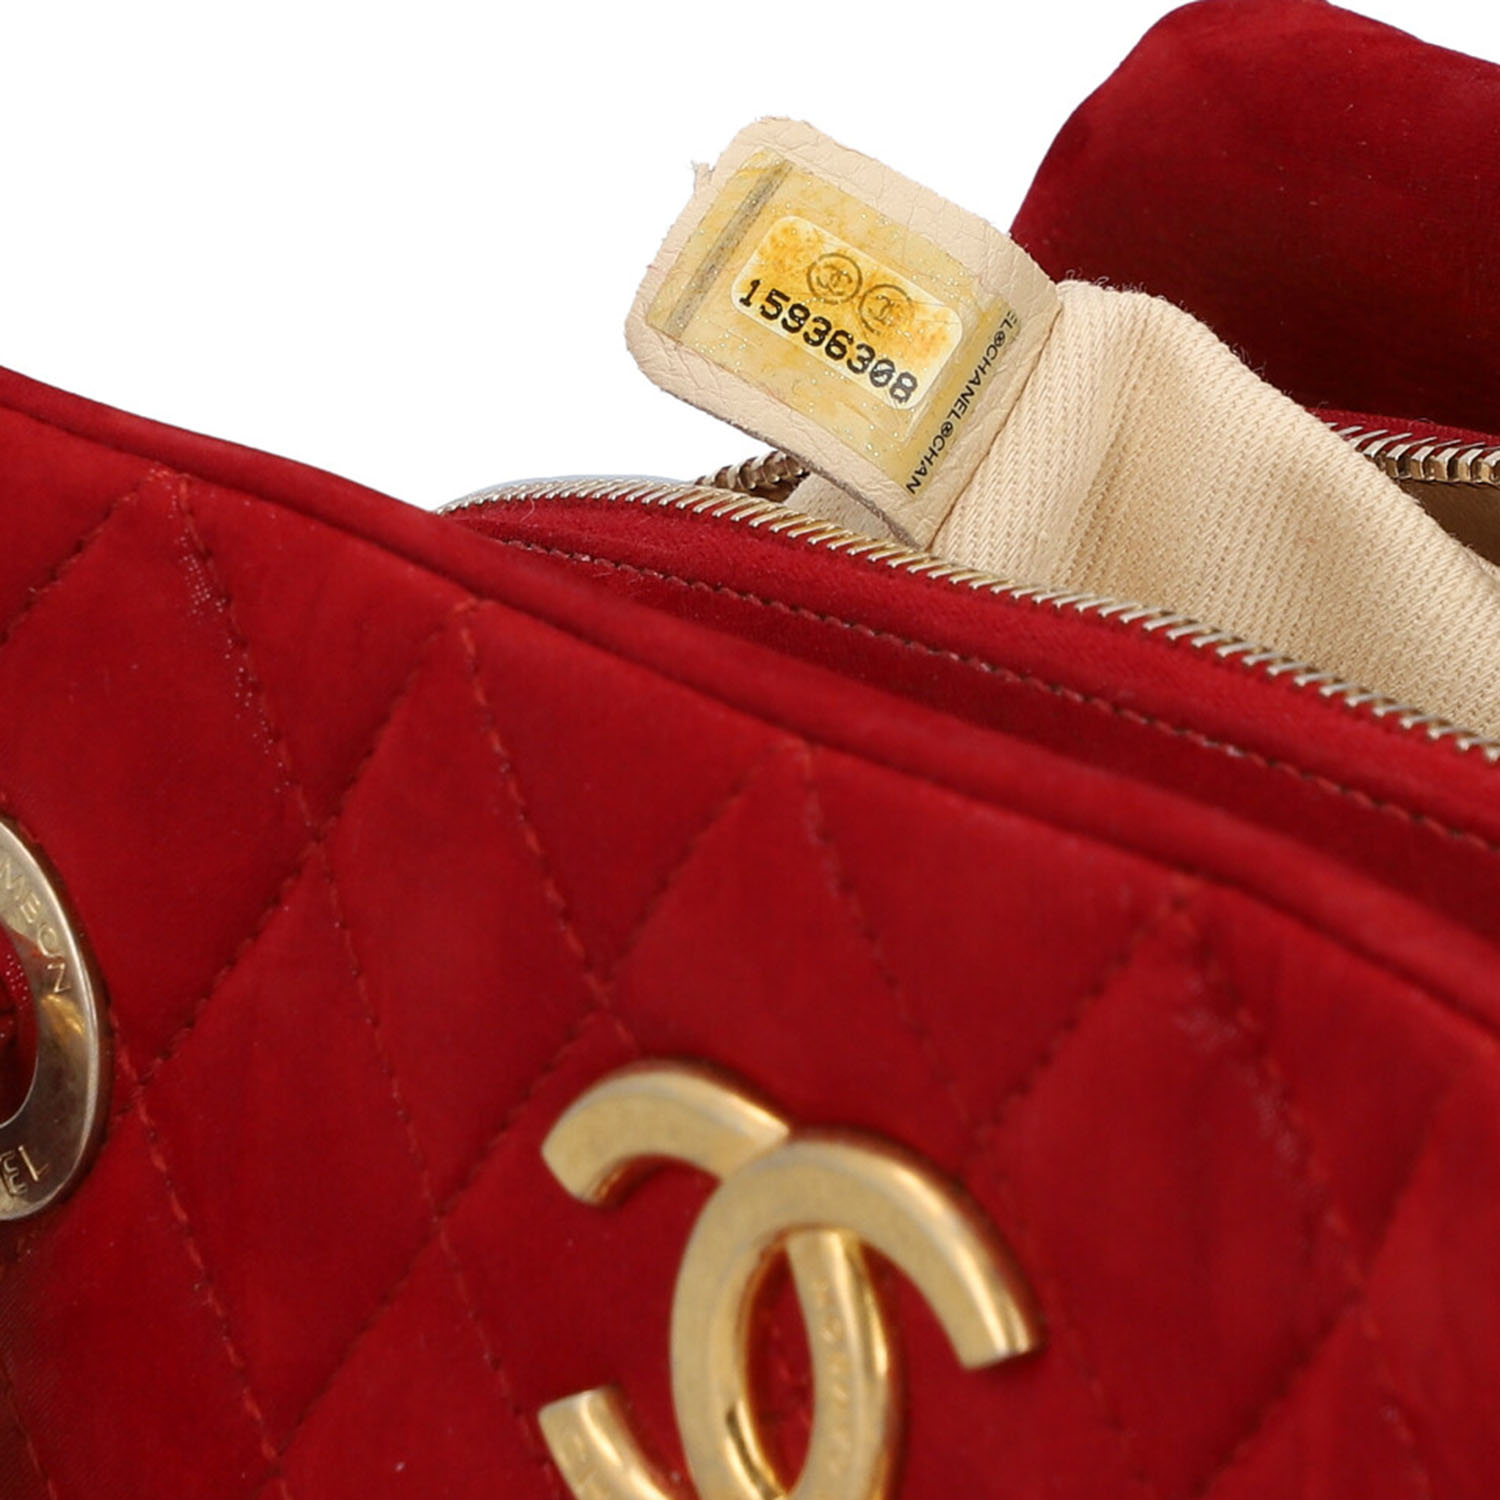 CHANEL Schultertasche, Koll. 2011. - Image 9 of 9